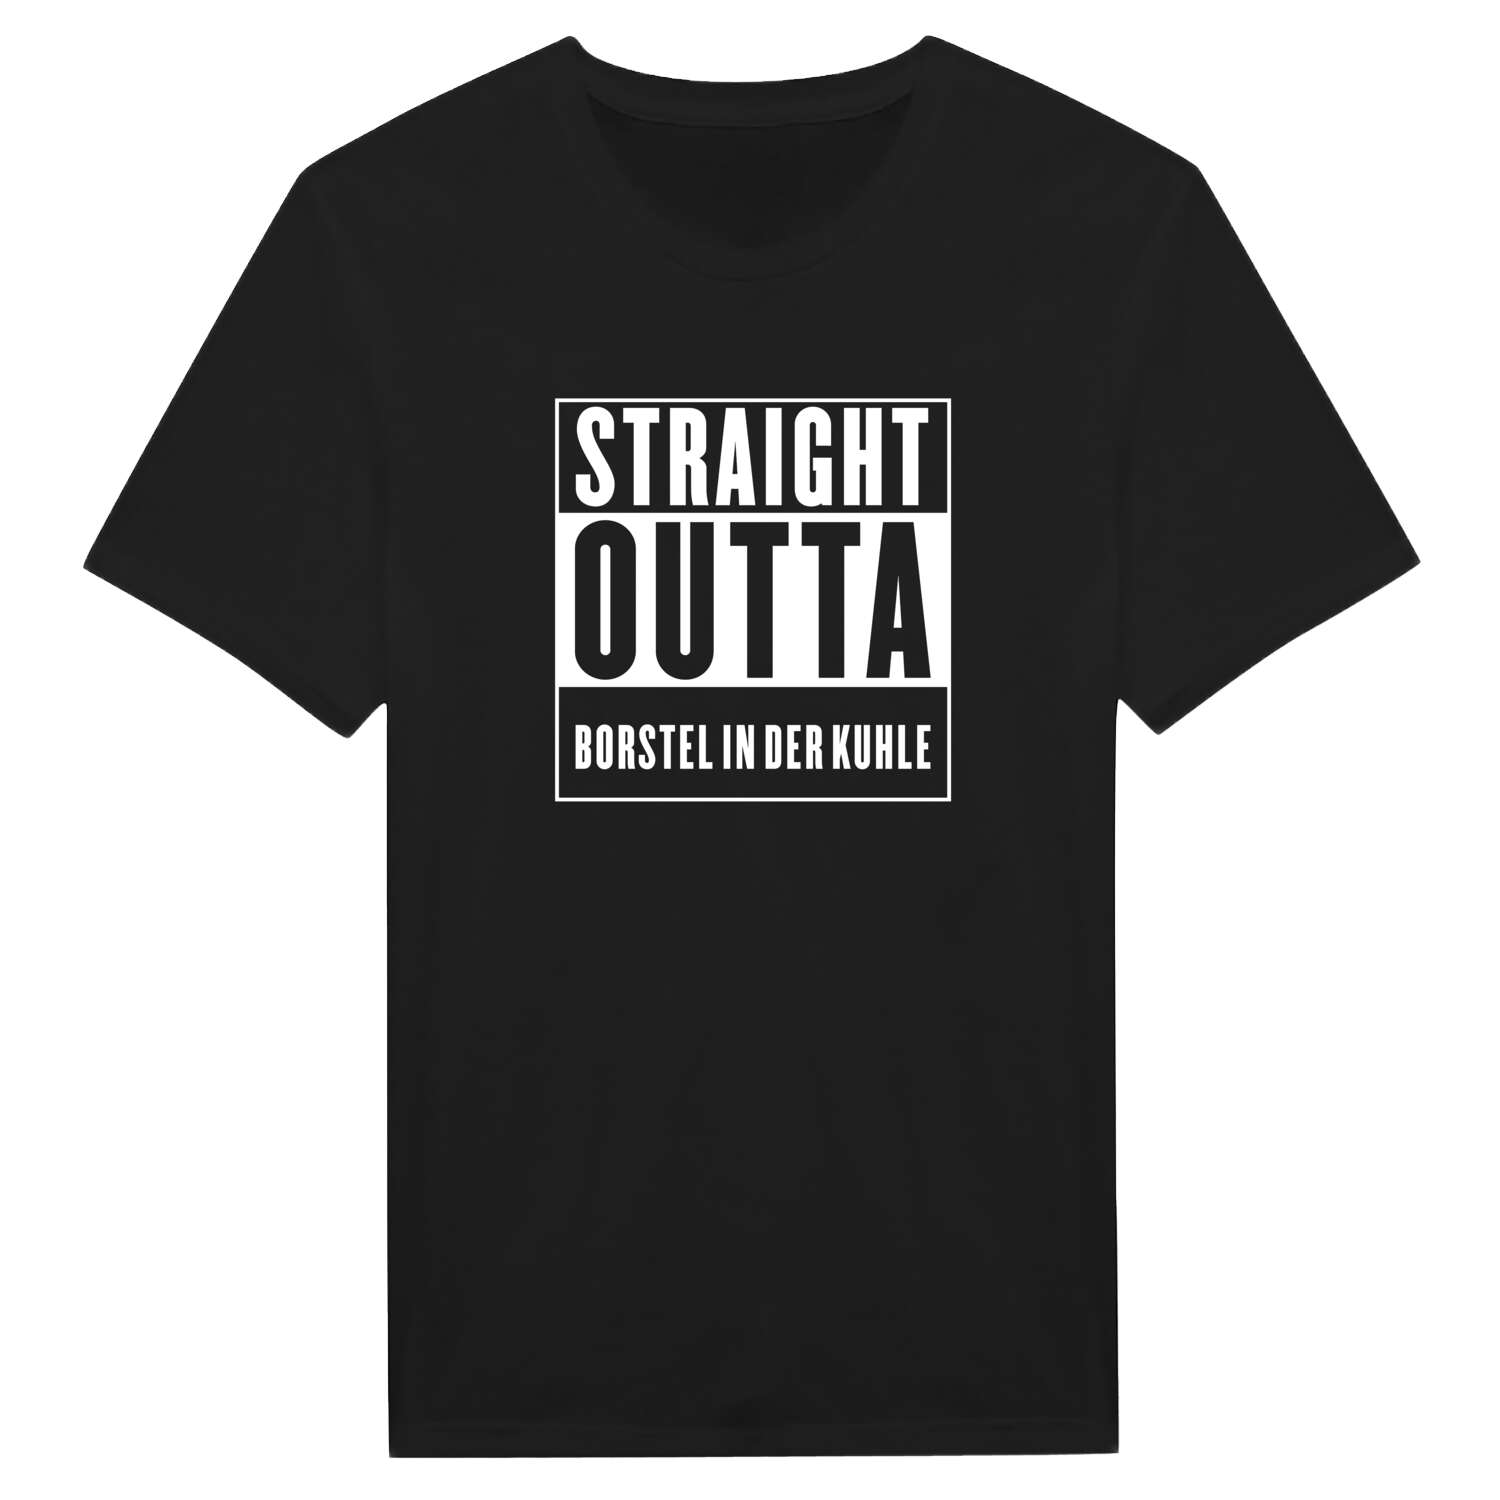 Borstel in der Kuhle T-Shirt »Straight Outta«